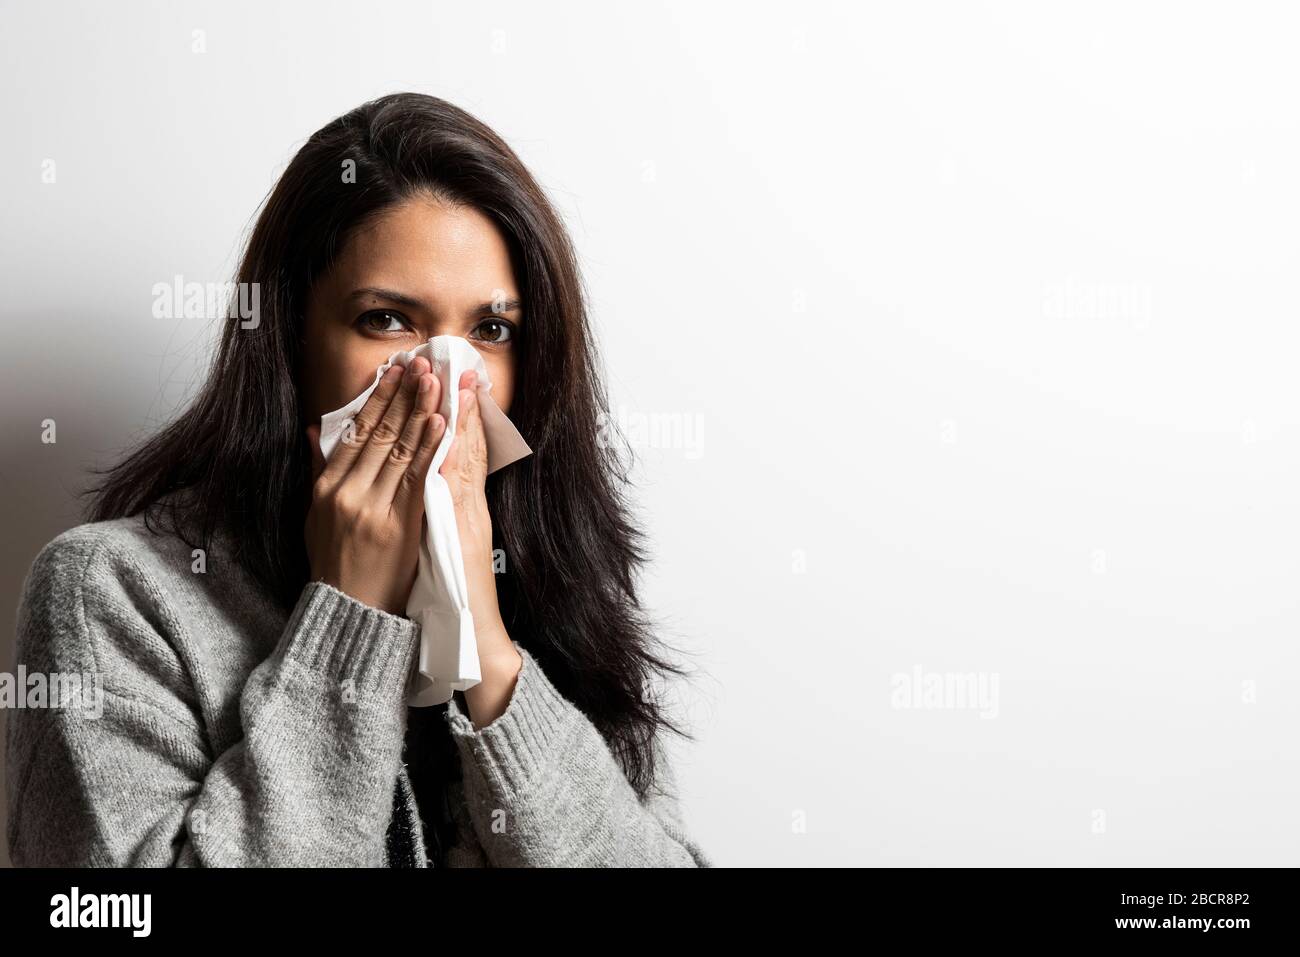 young woman blowing her nose on a white background. Stock Photo